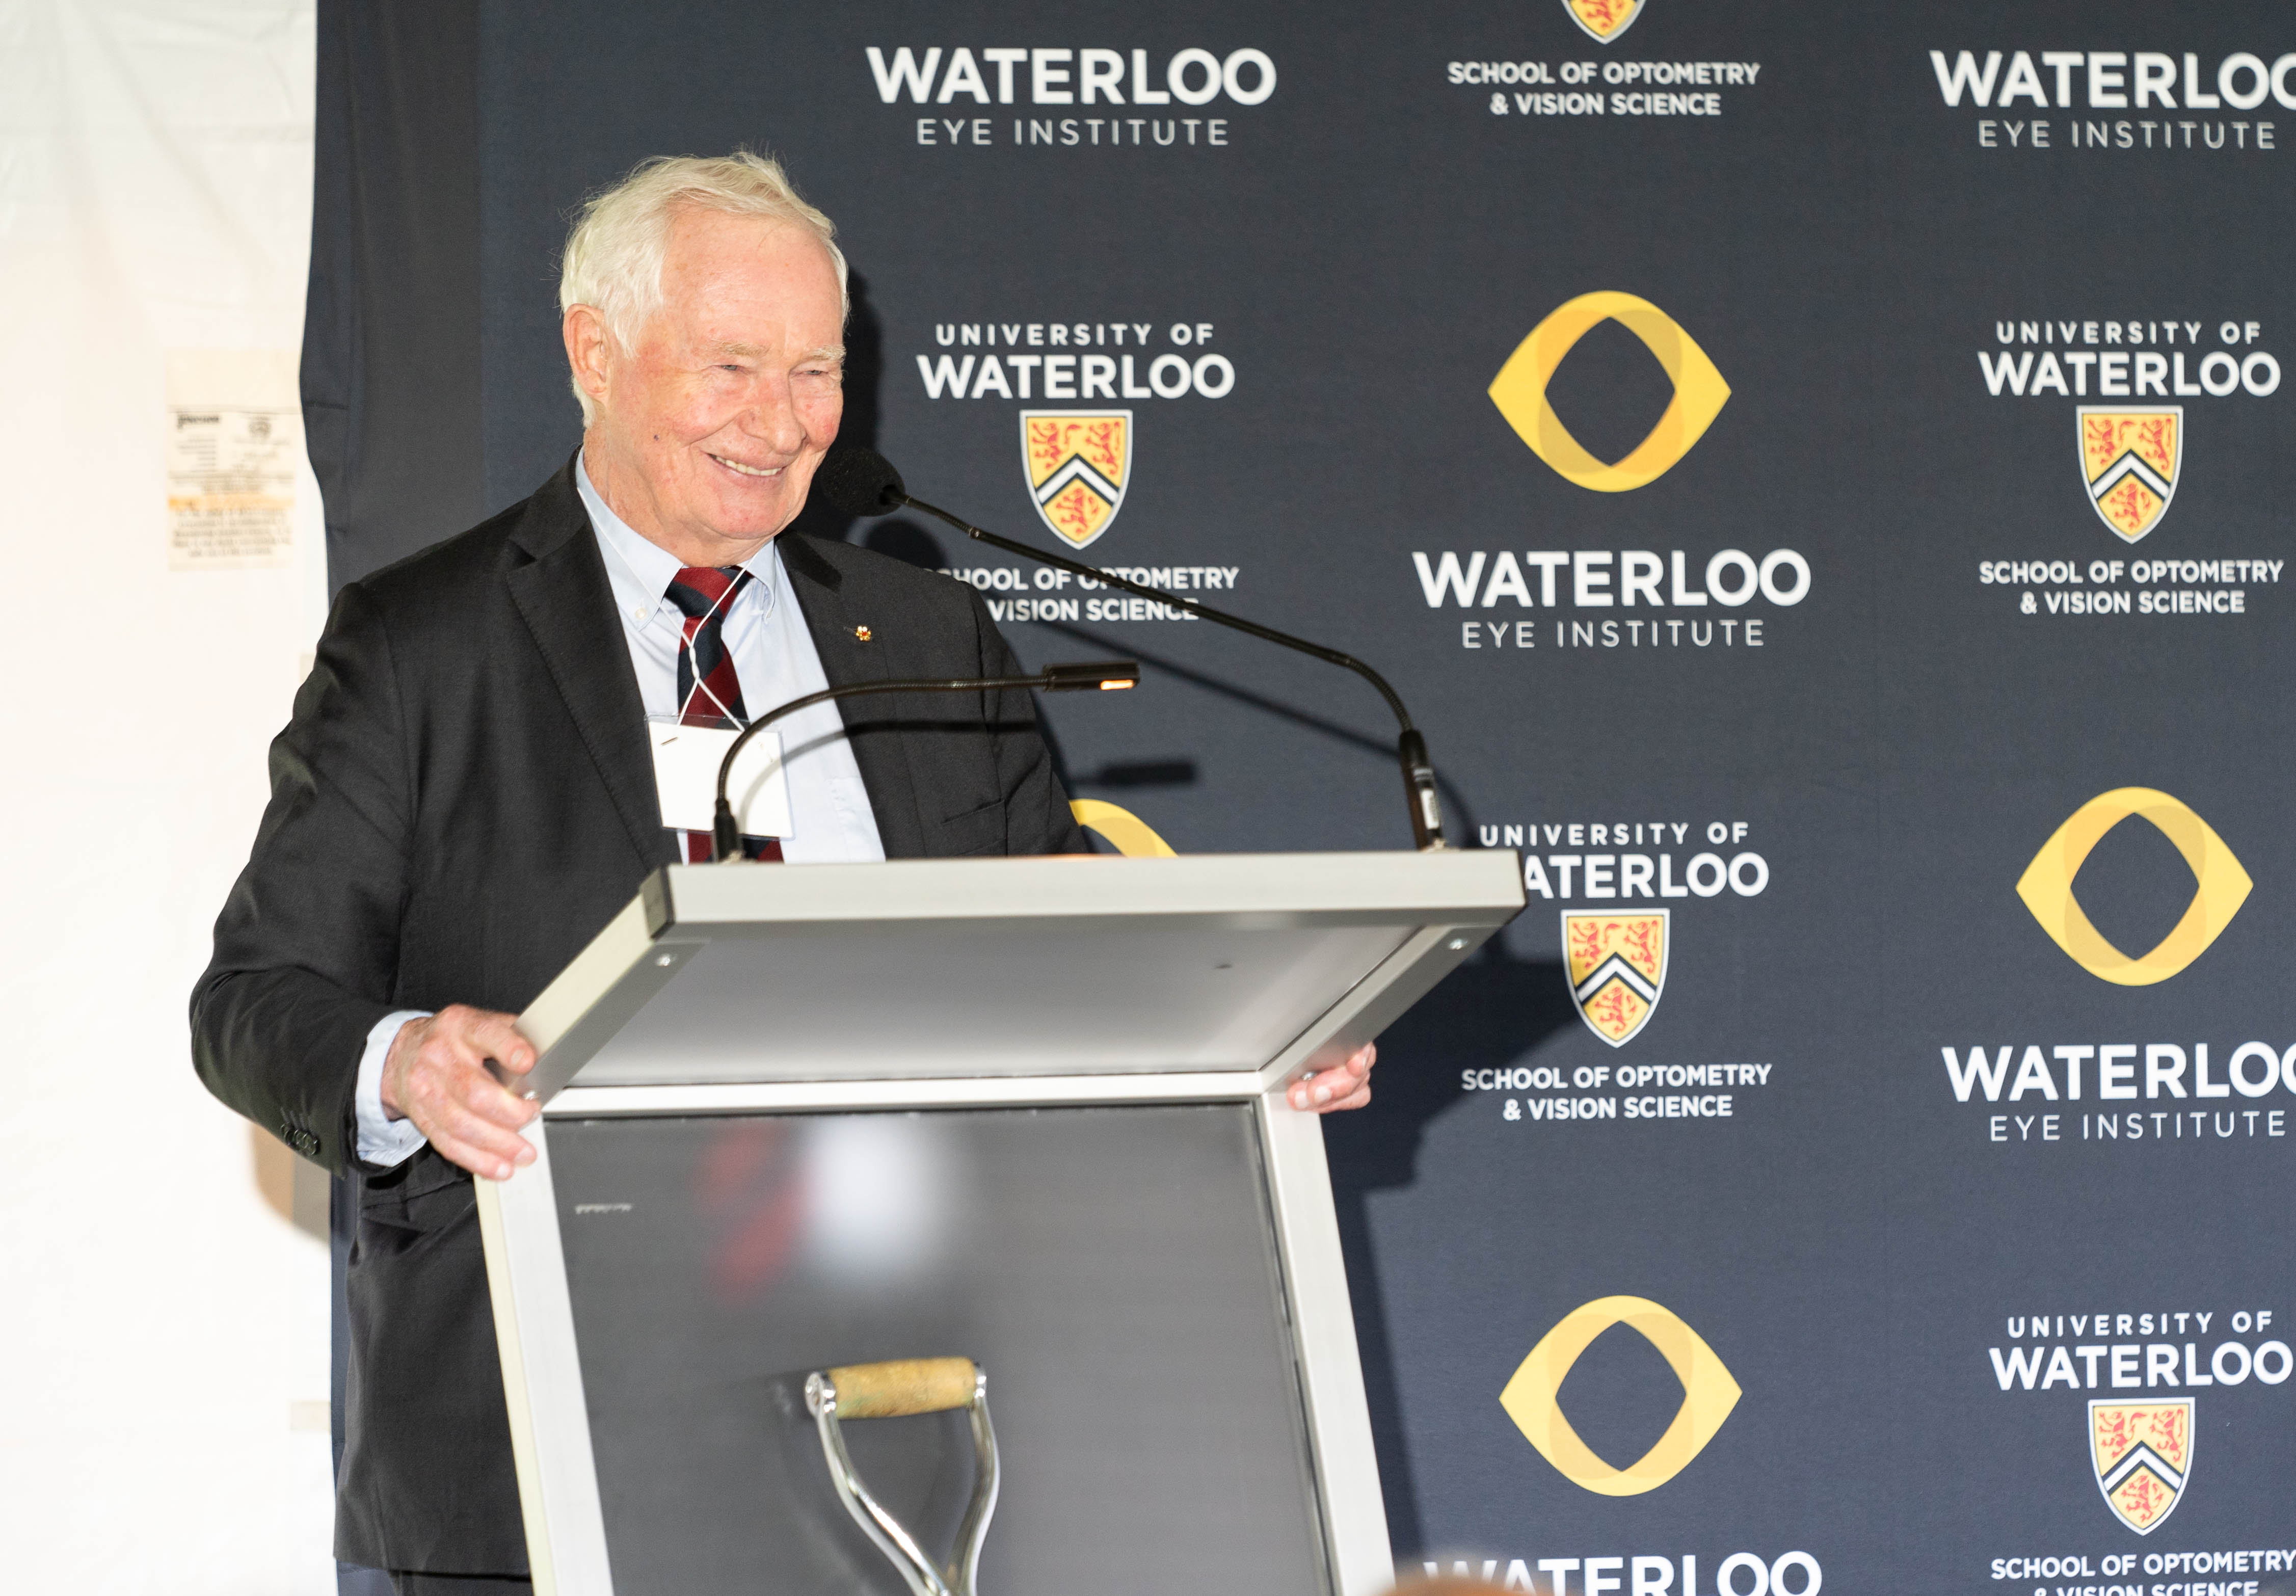 The Right Honourable David Johnston addressing the audience attending the groundbreaking Waterloo Eye Institute ceremony